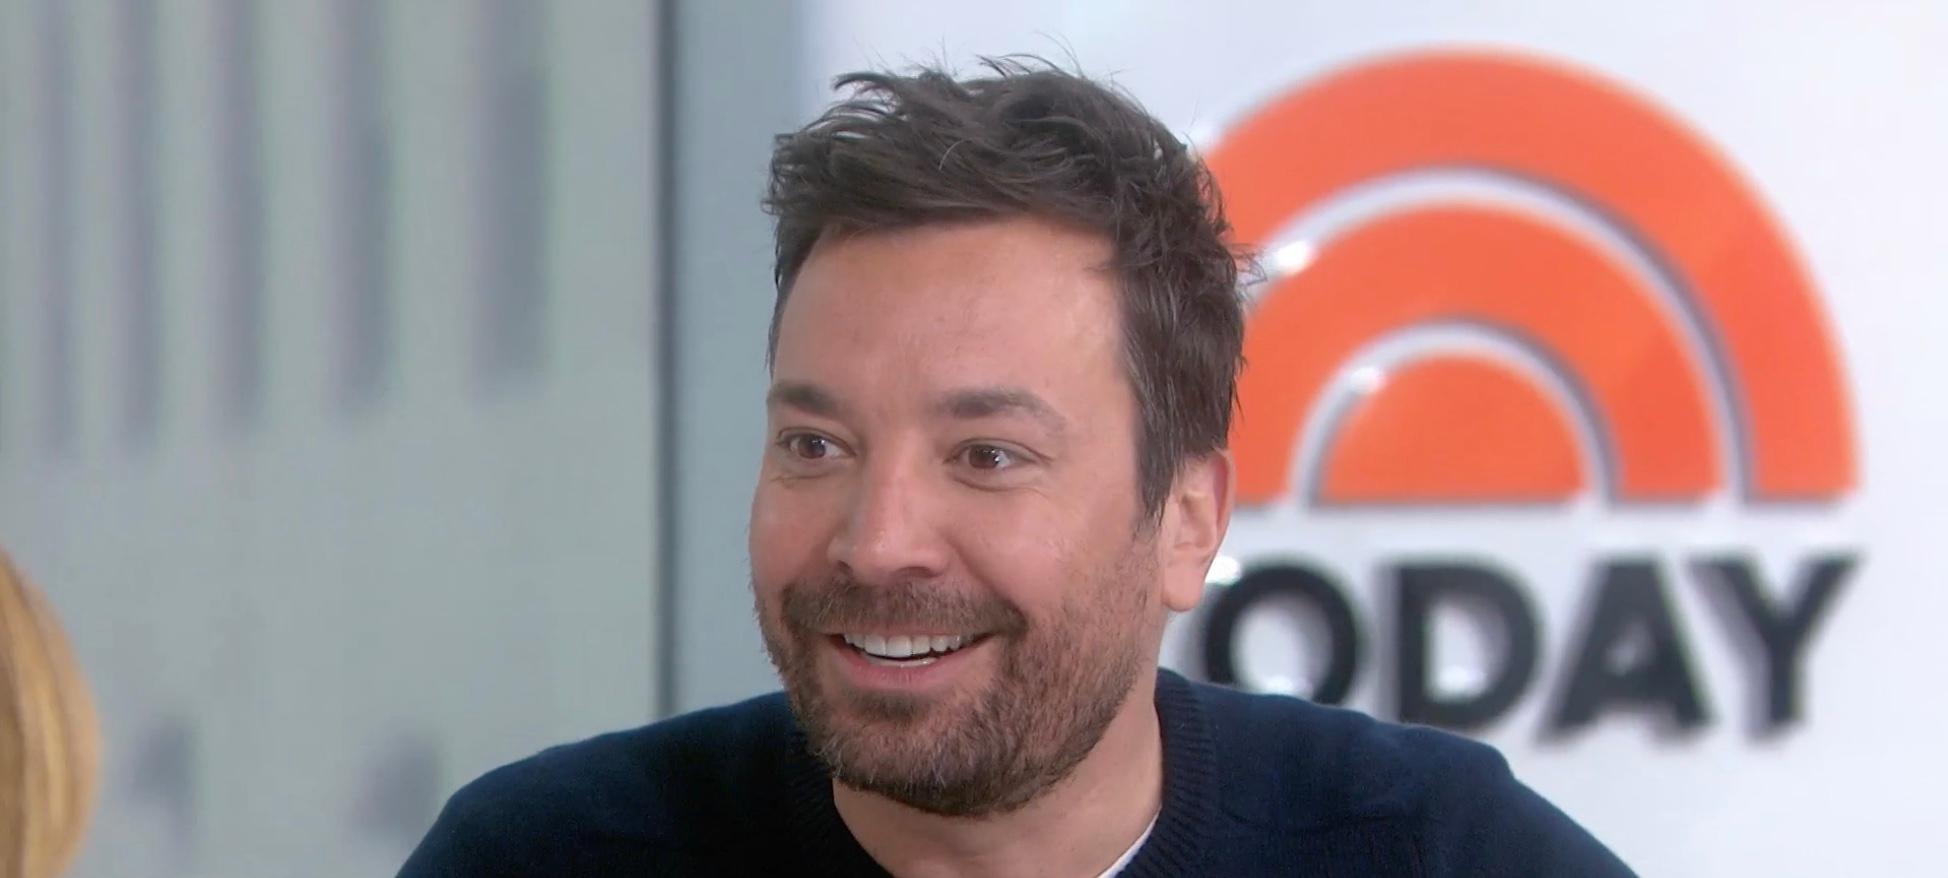 Jimmy Fallon Has a Beard and Fans Are Thirsting After Him